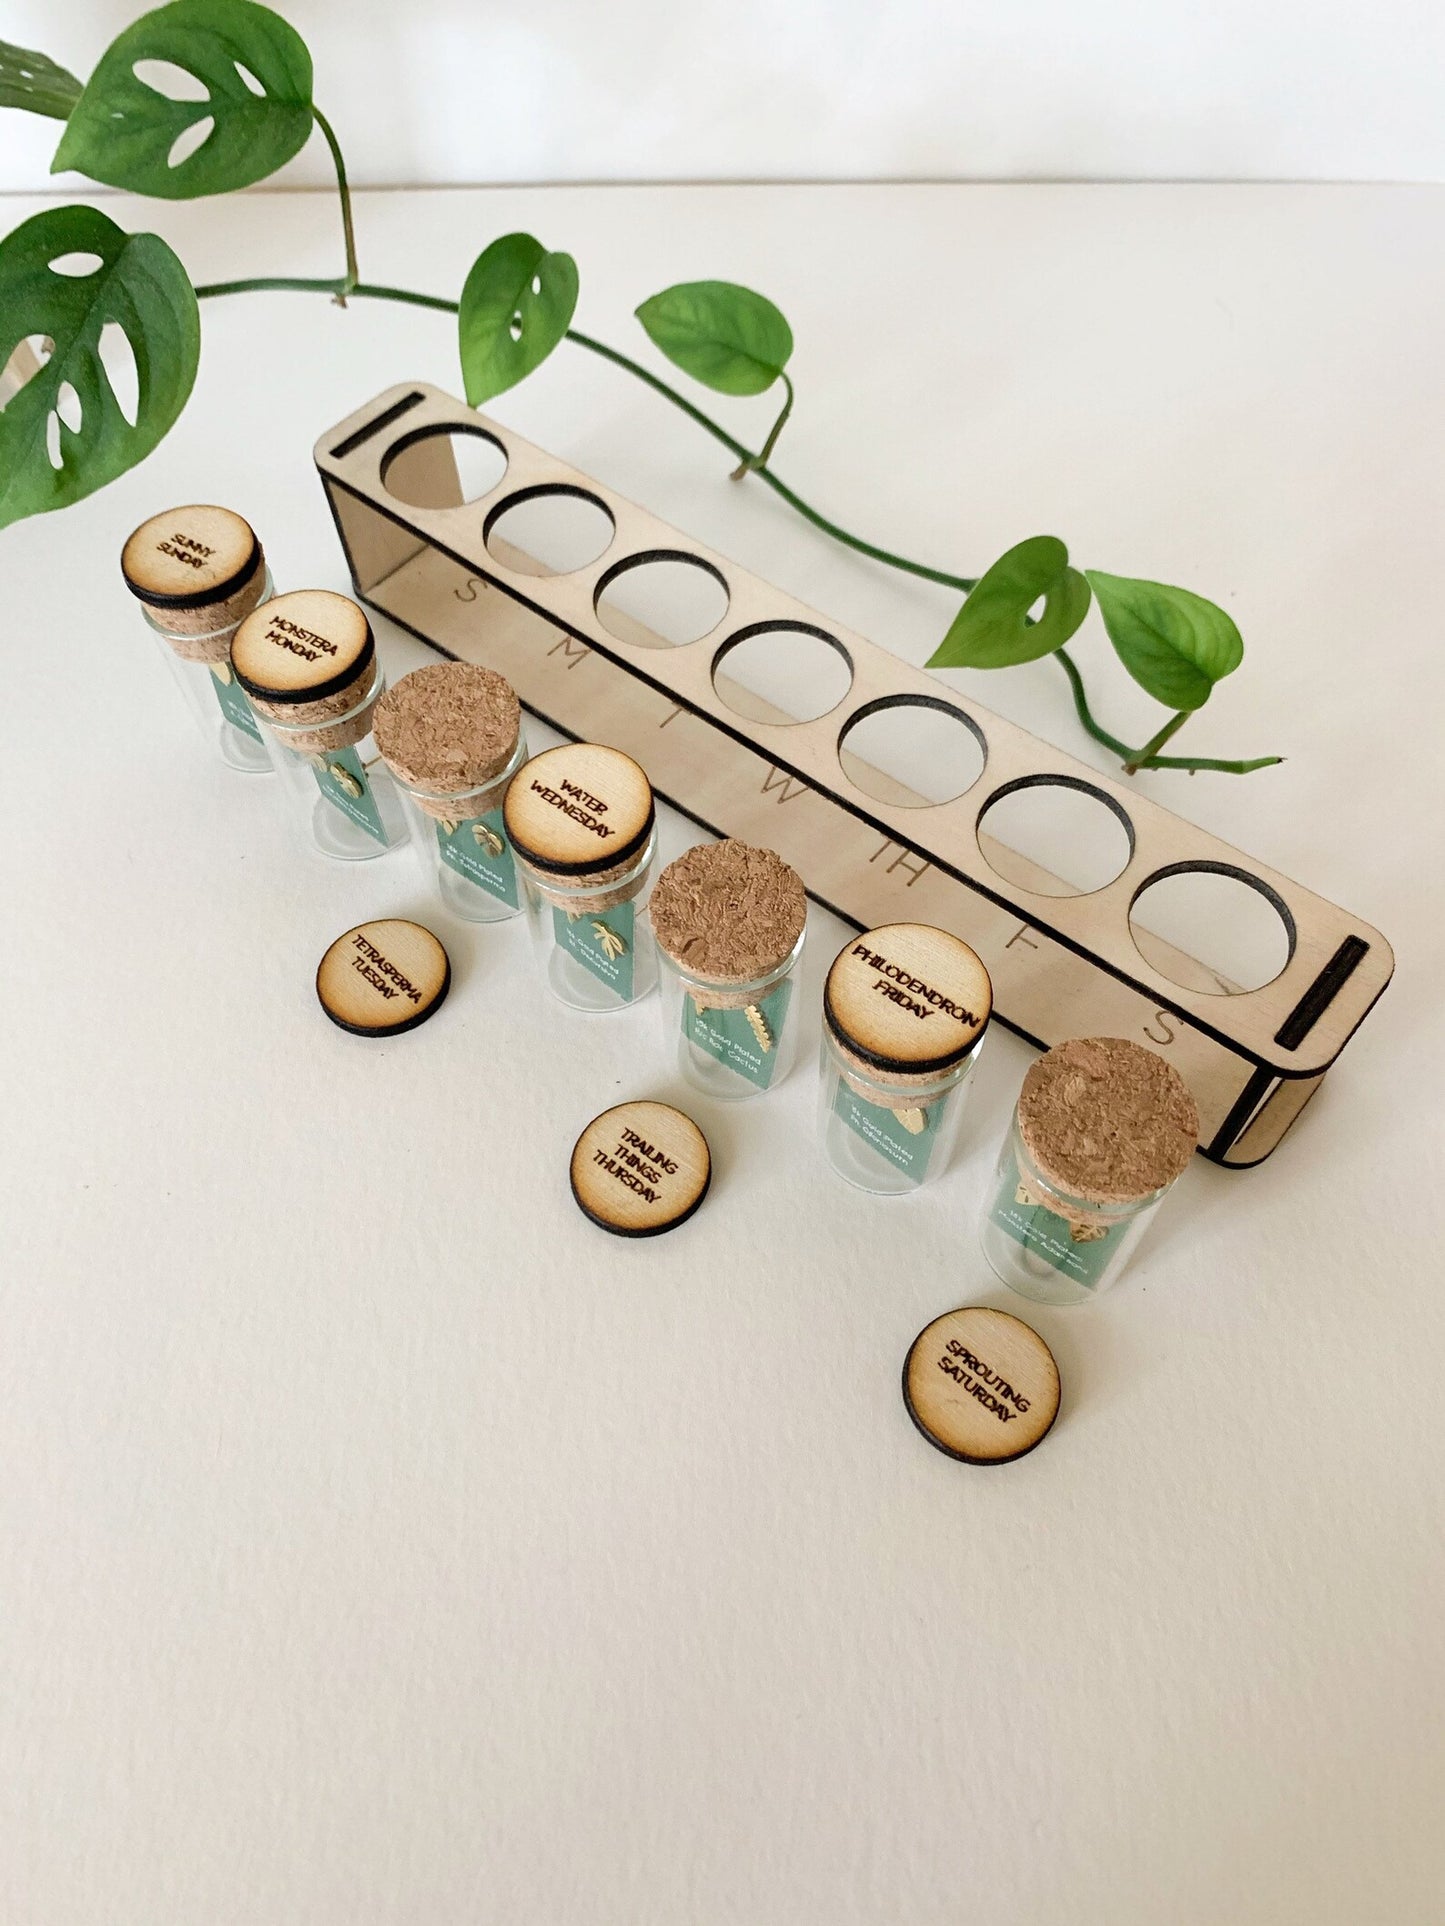 Tiny Houseplant Earring set Propagation Station- 3 pairs of earring studs